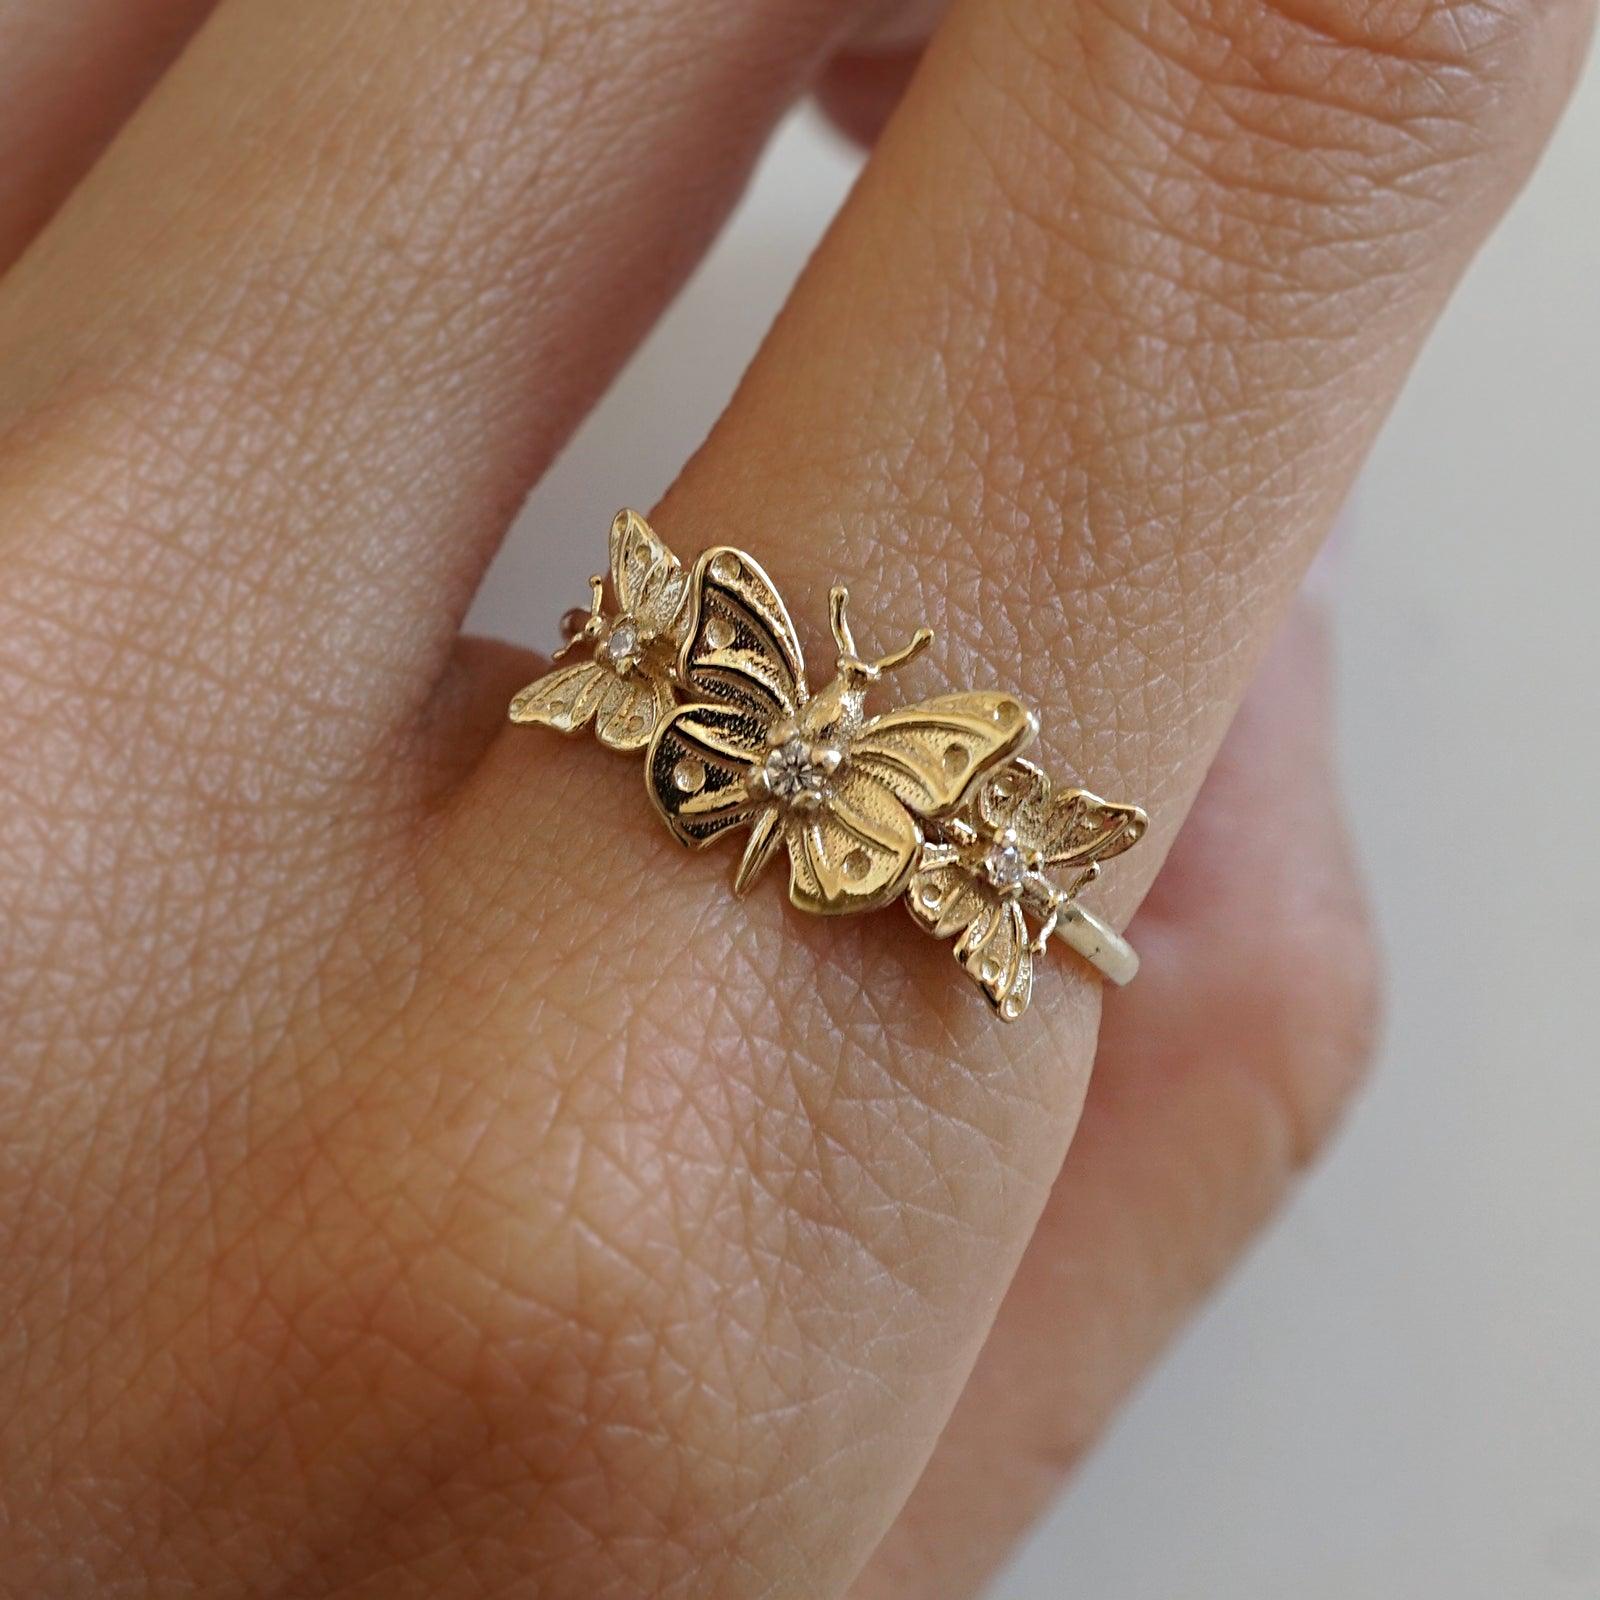 Solid 10K Rose Gold Butterfly Ring Large Pierced Butterfly, Size 3 - 12 -  Jahda Jewelry Company Custom Gold Rings, Necklaces, Bracelets & Earrings -  Sacramento, California